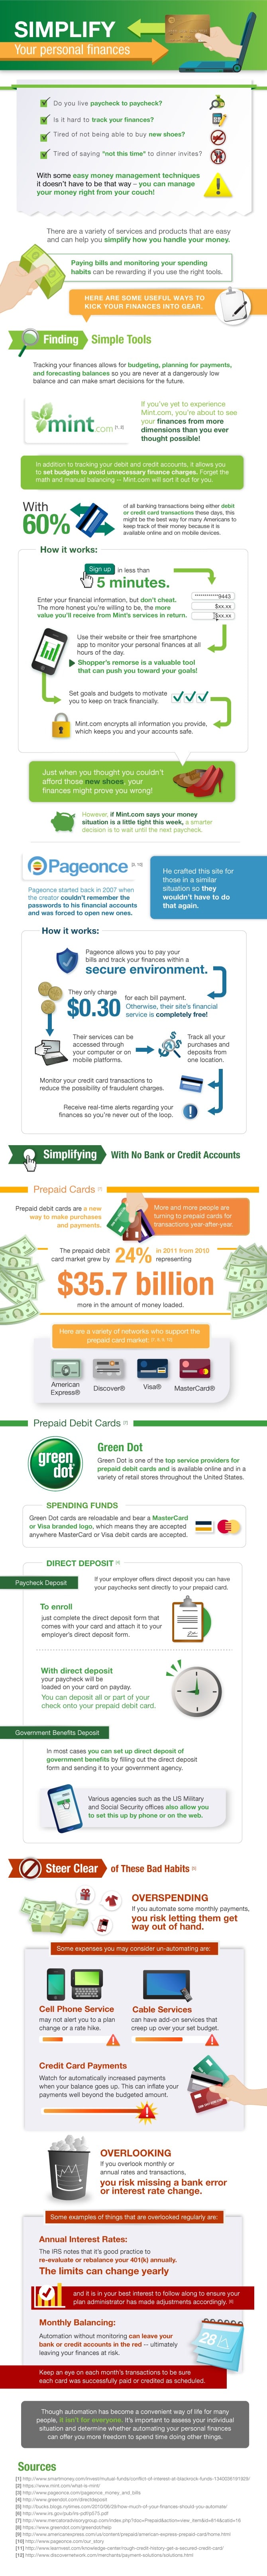 Tackle Debt With Tech In 2013 [Infographic]